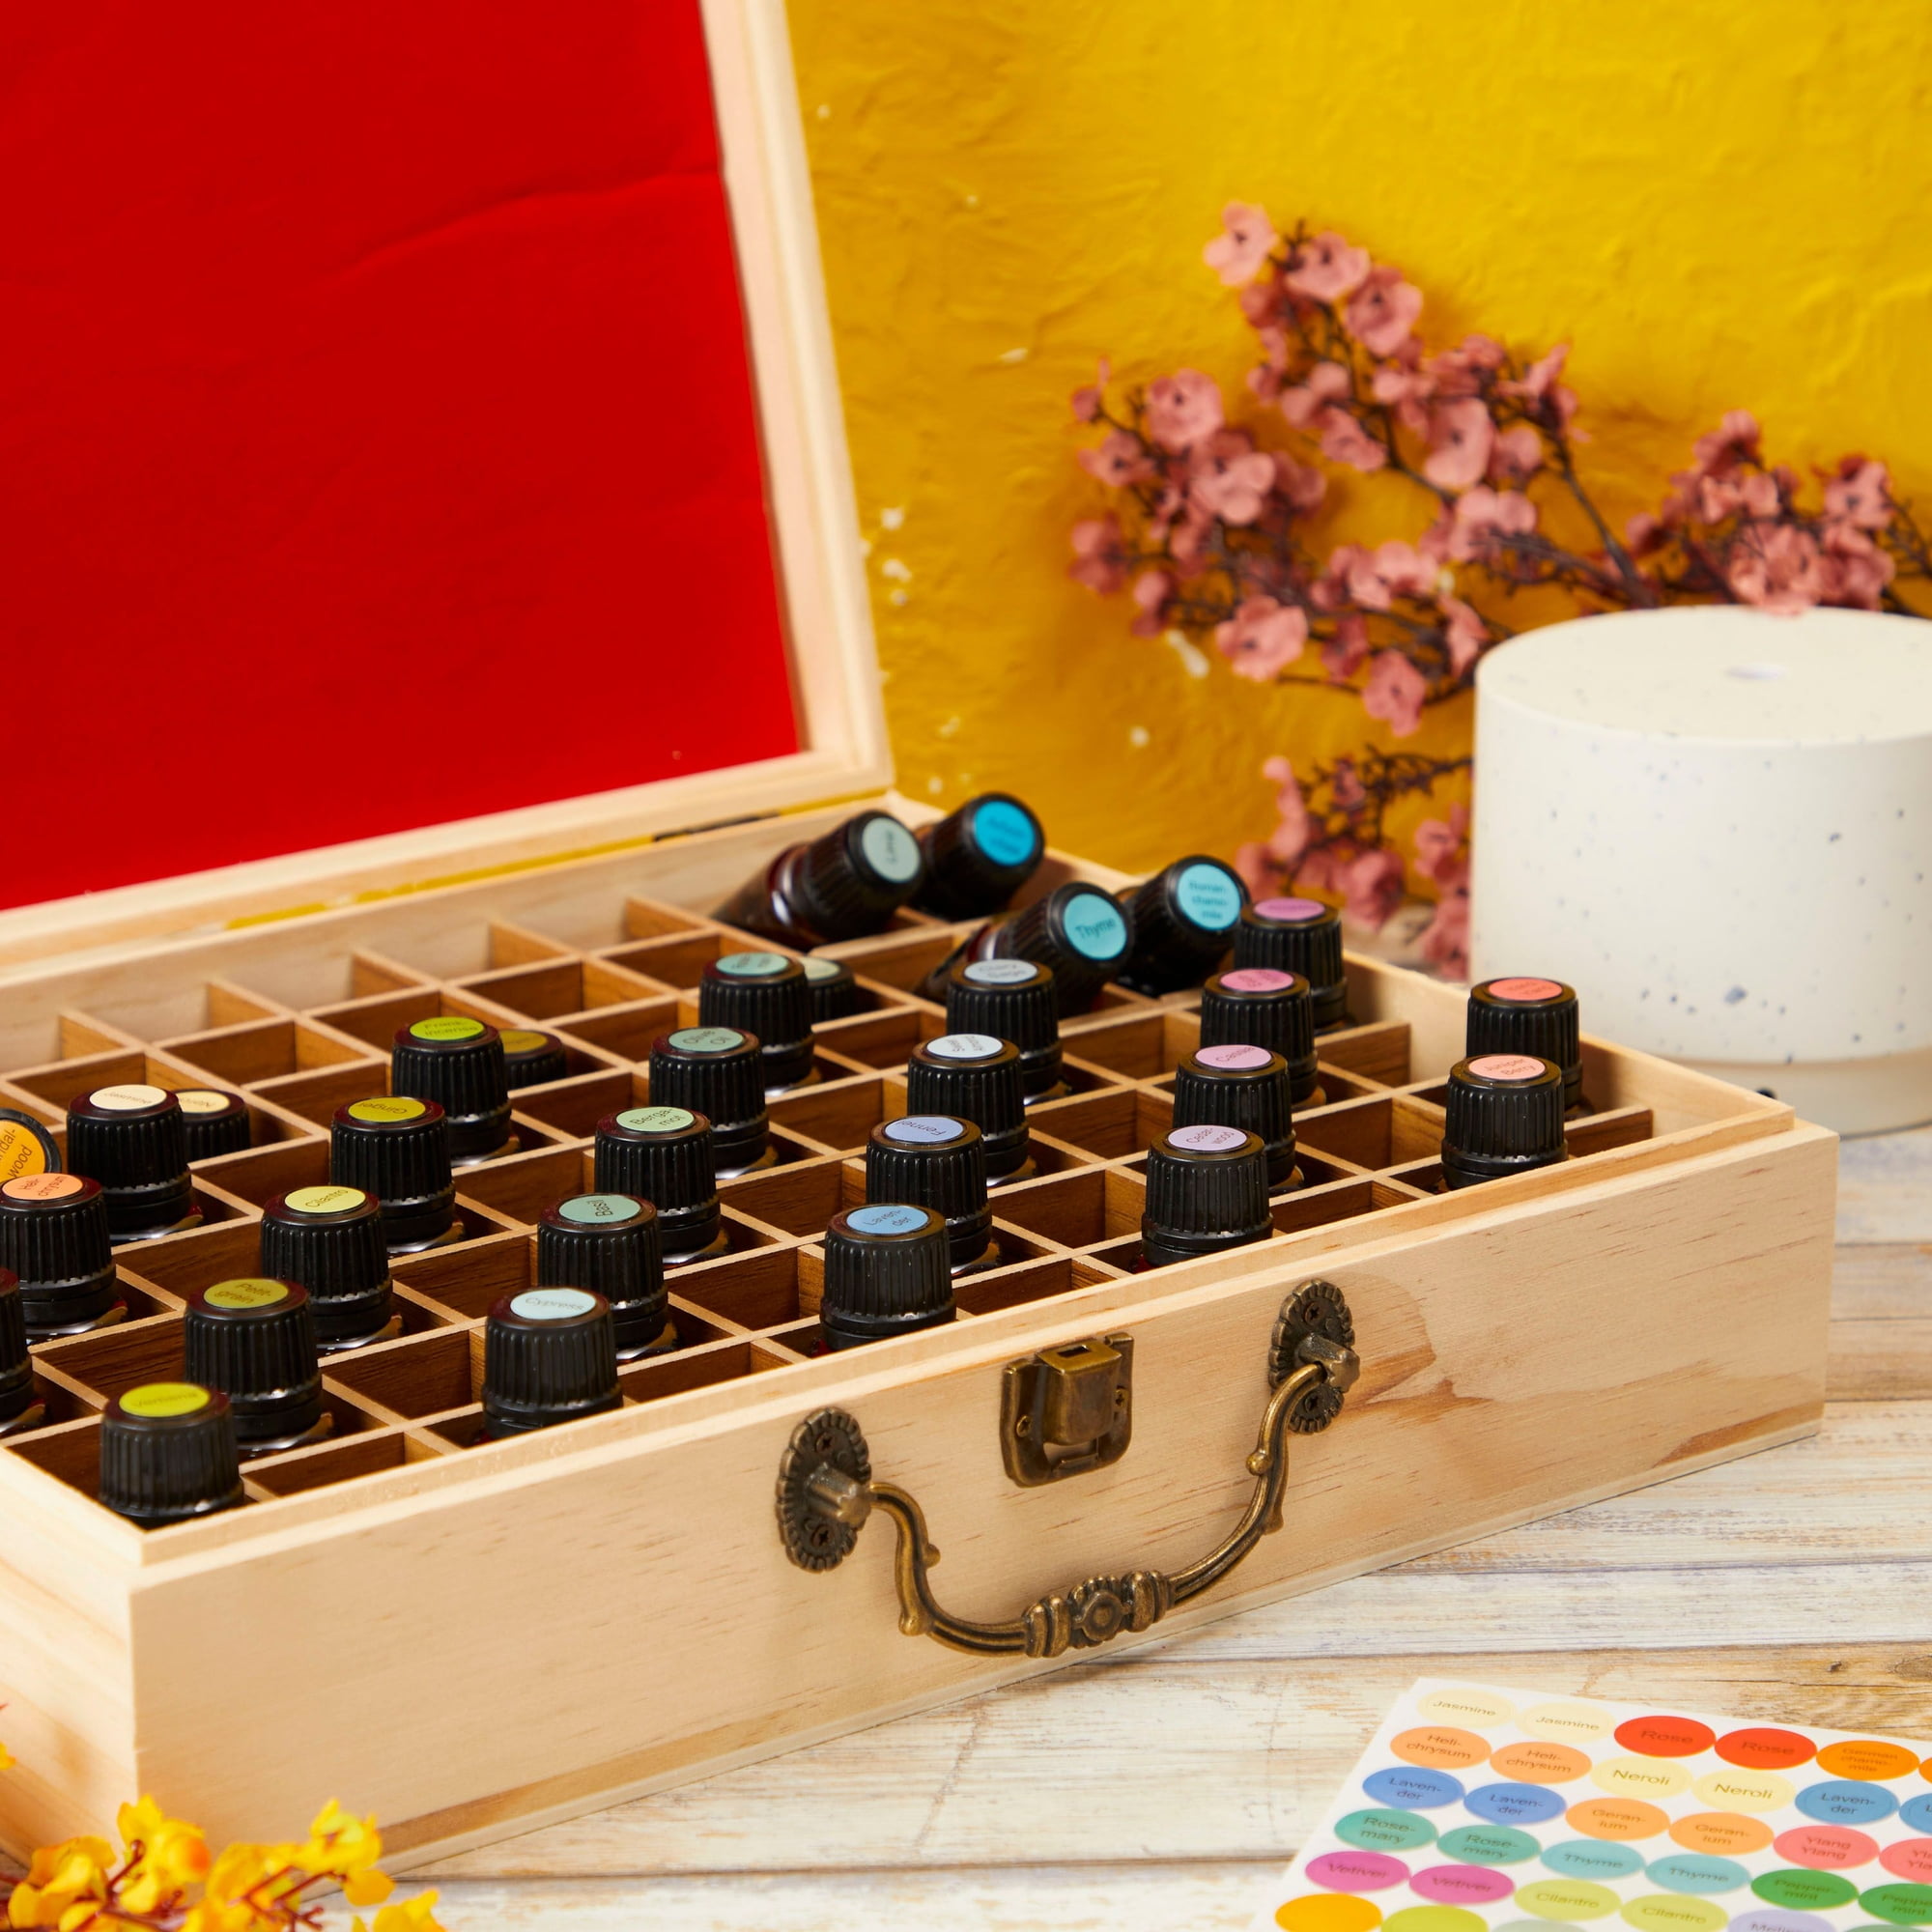 Wholse Sales Essential Oil Box Wooden Storage Container Holds Bottles  Multi-Tray Organizer - China Oil Box and Storage Box price